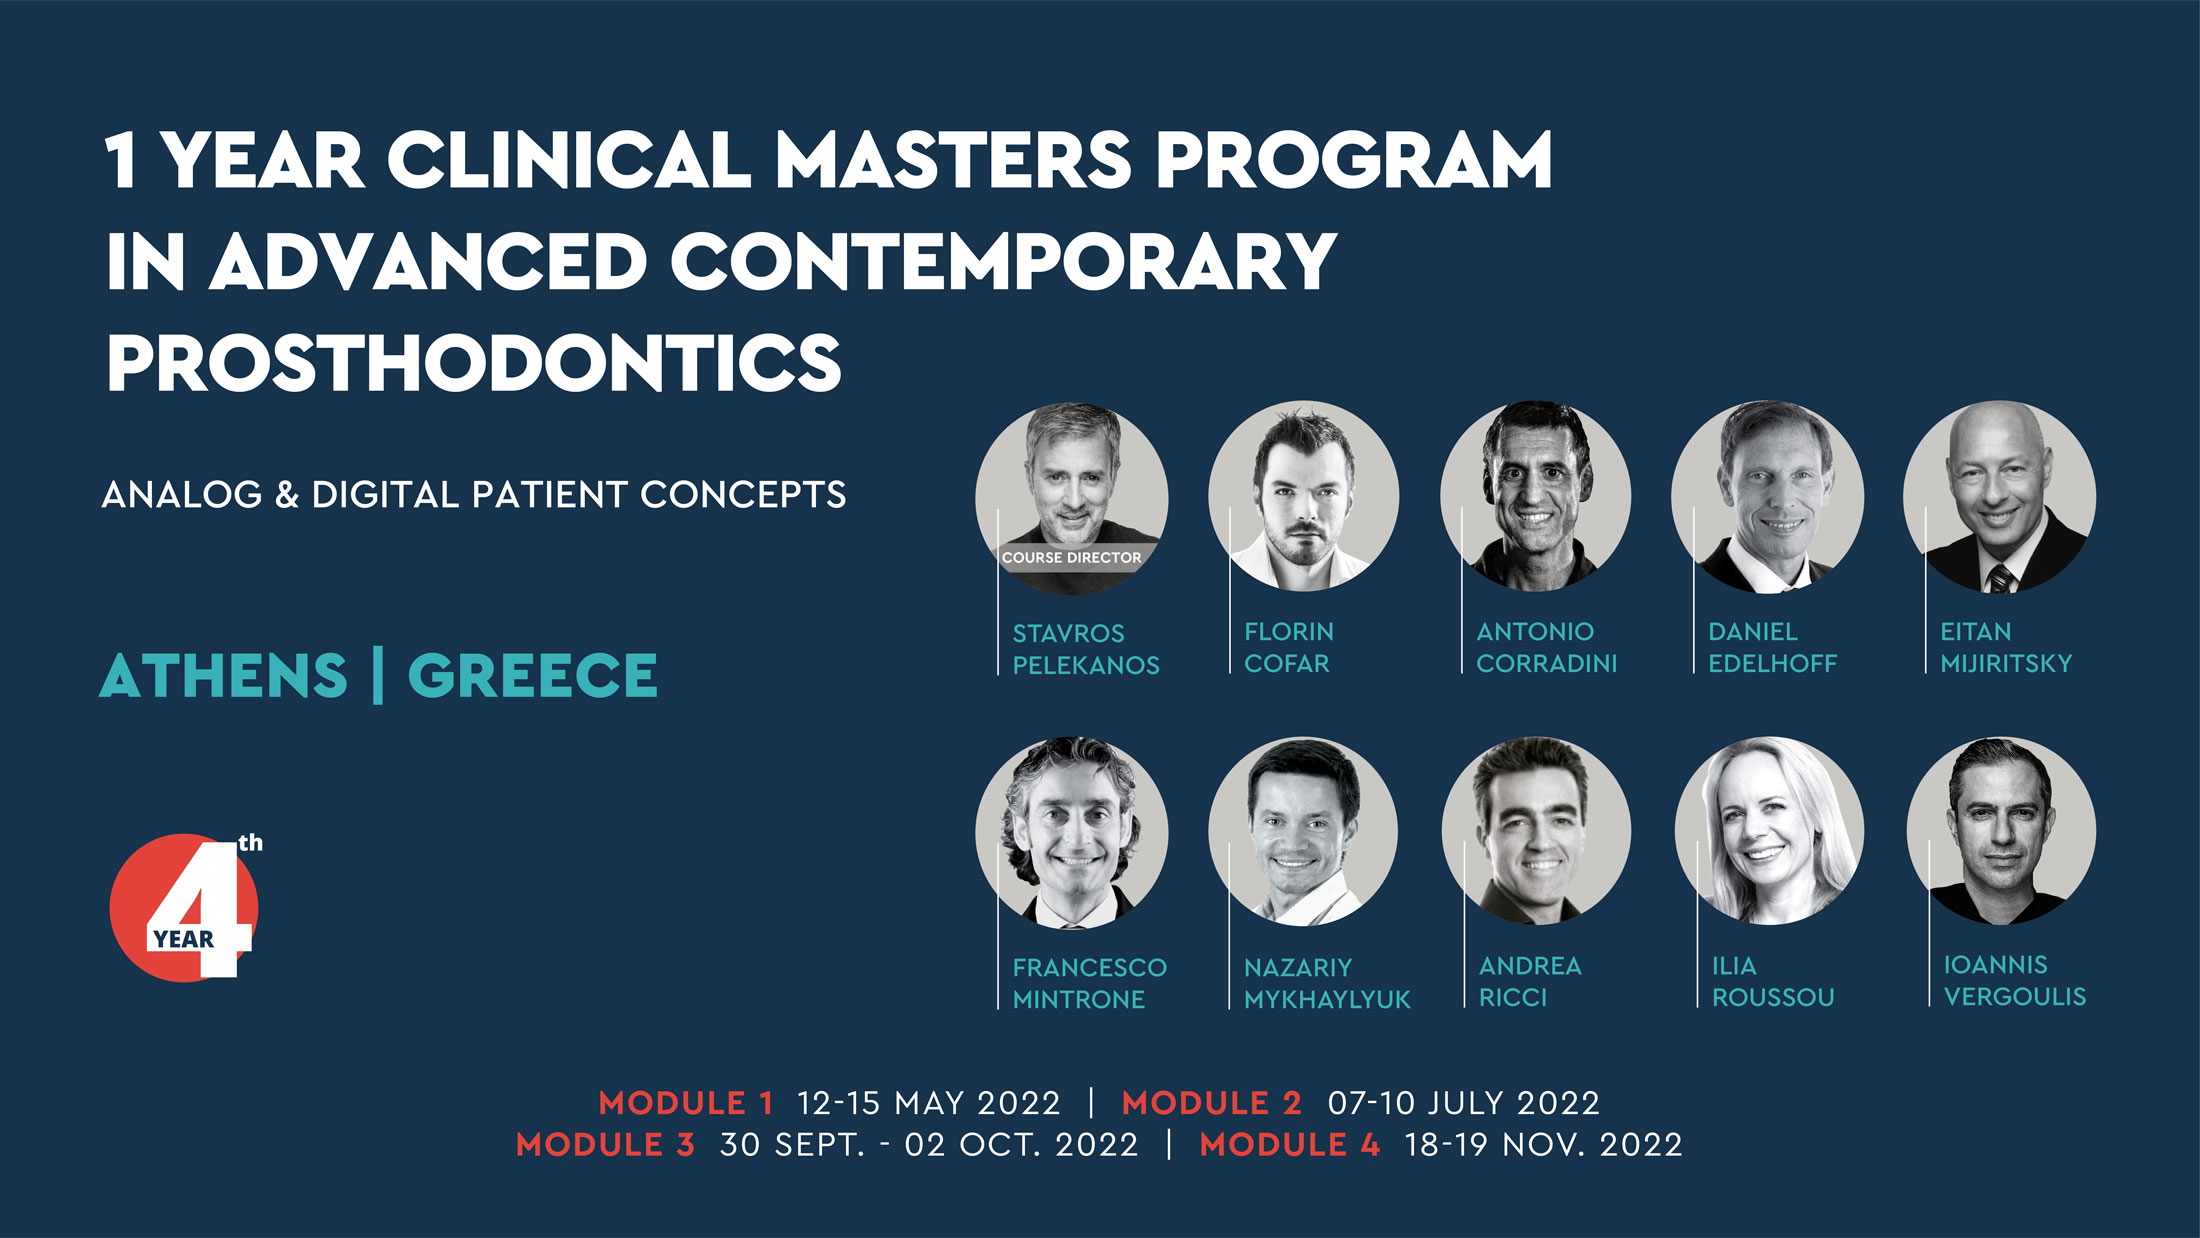 1 Year Clinical Masters Program in Advanced Contemporary Prosthodontics (2022)